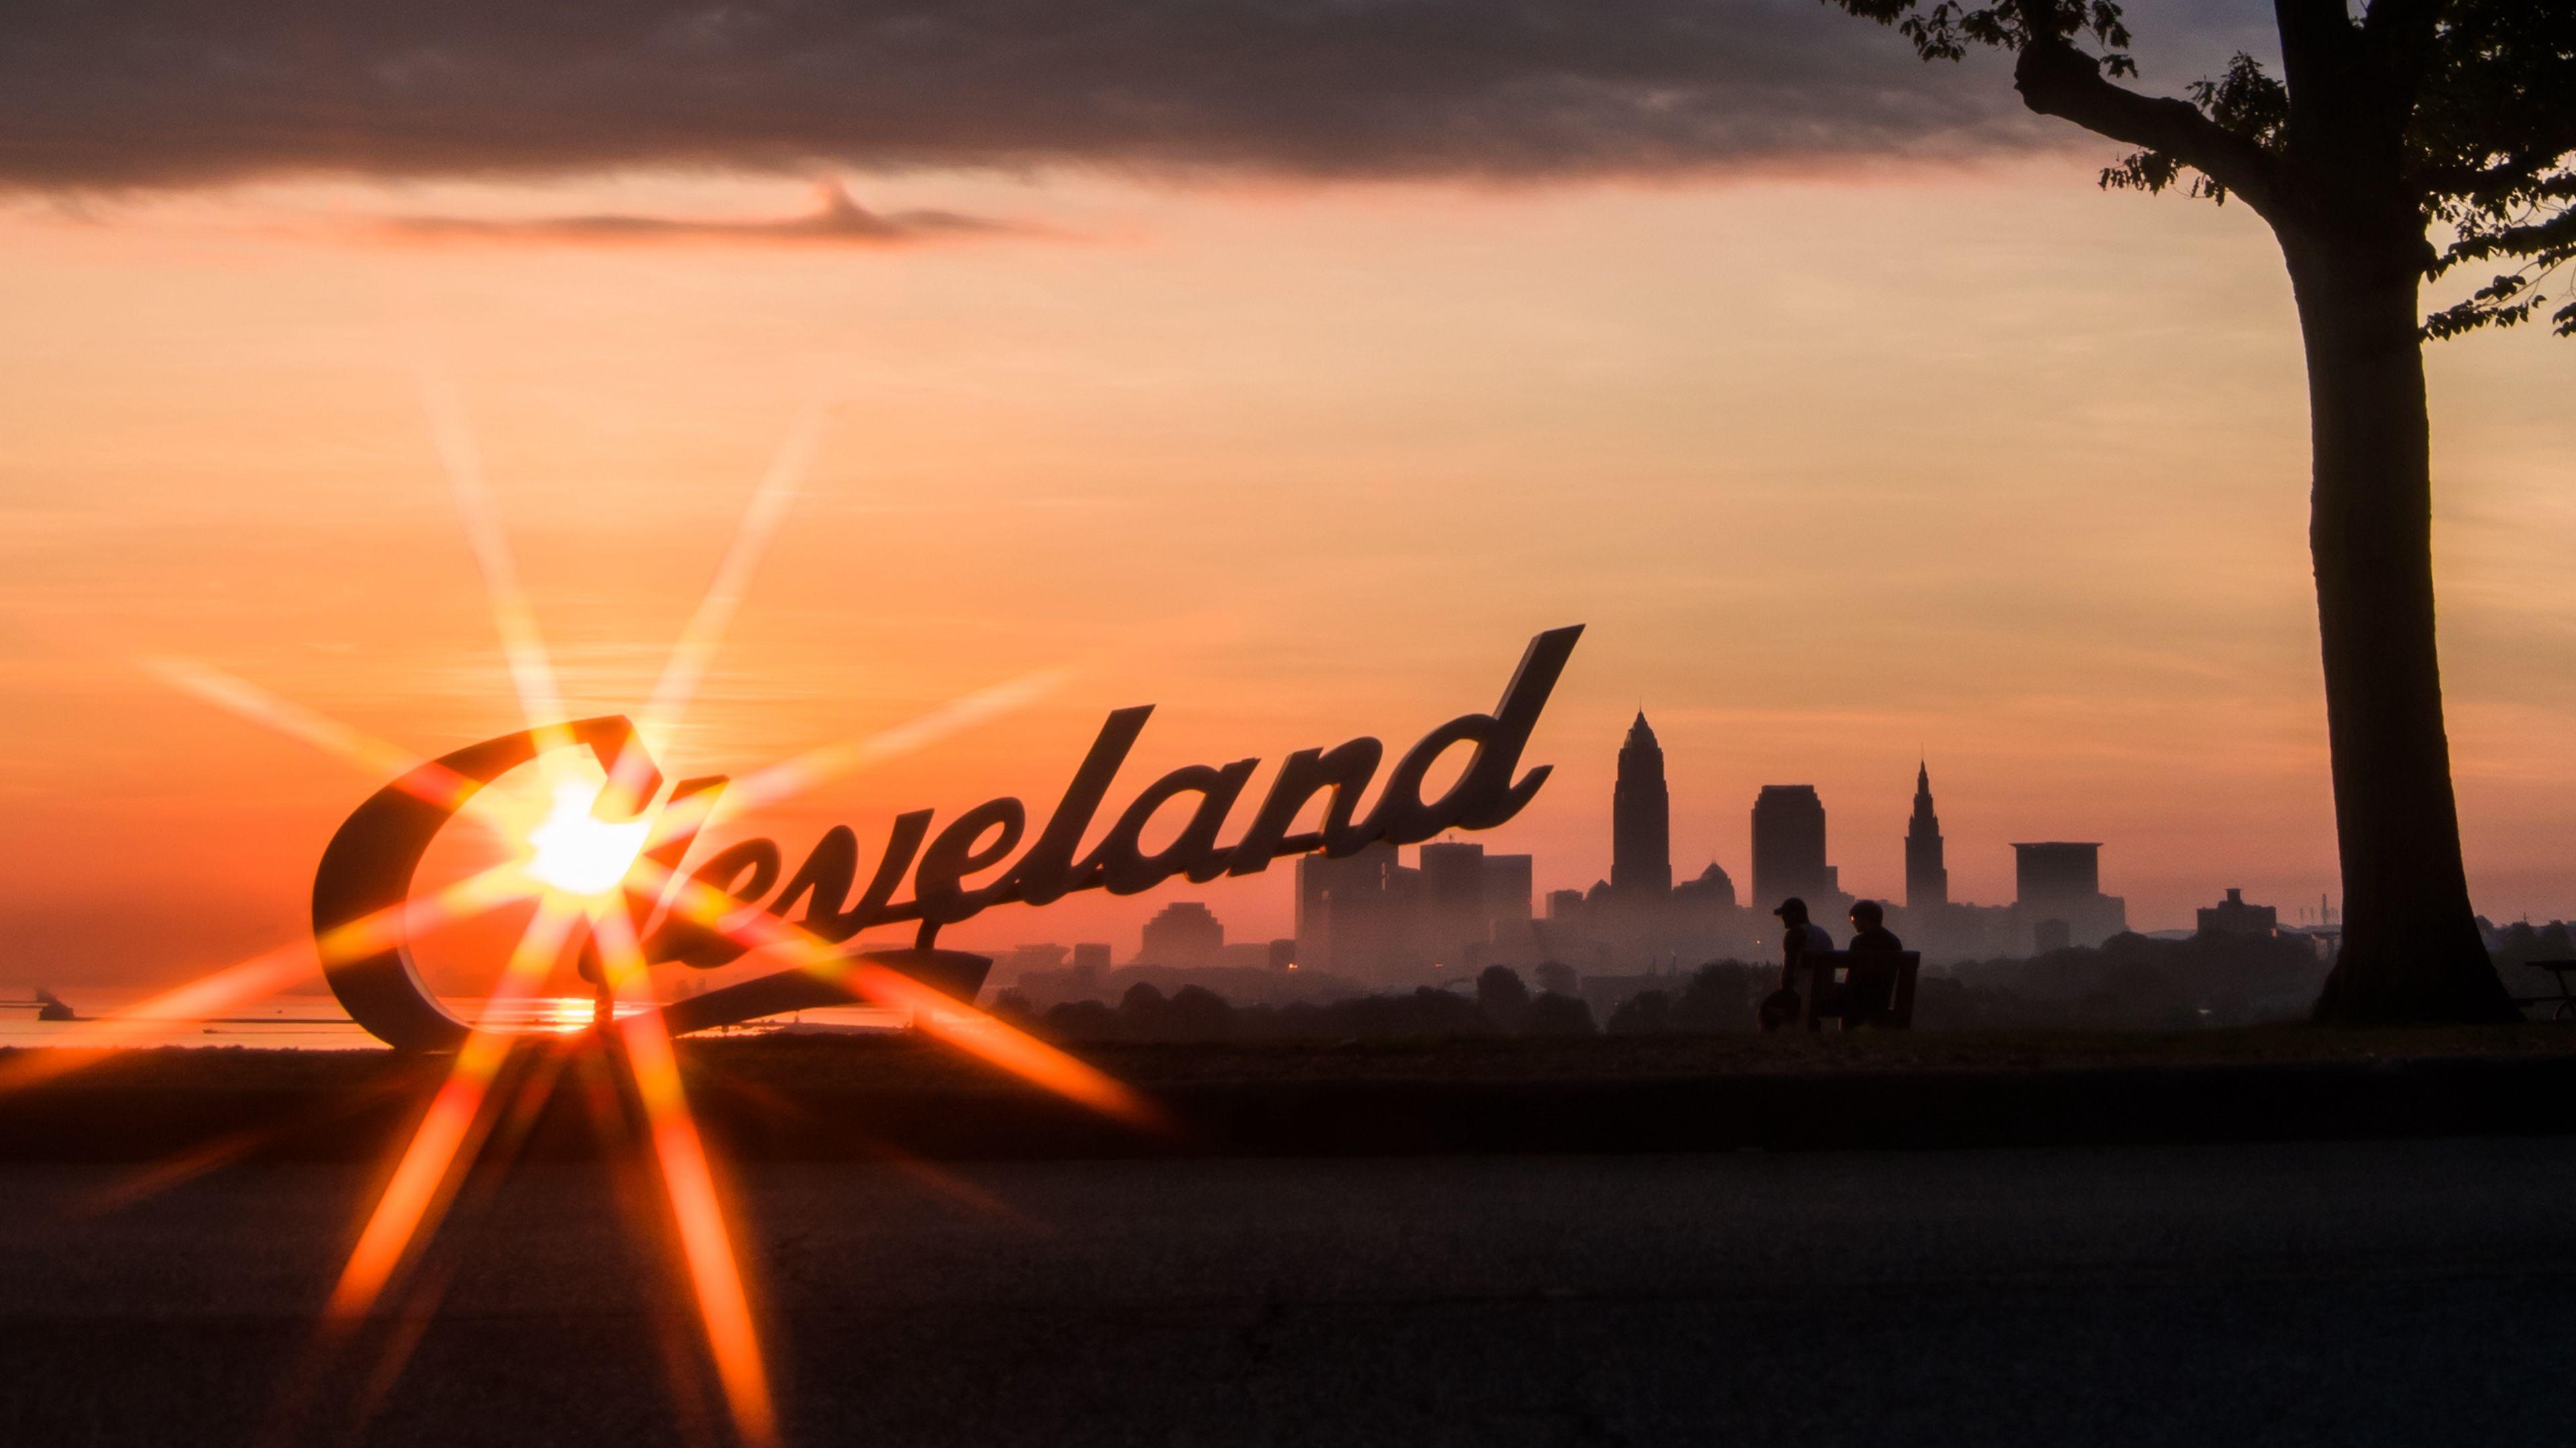 Wallpaper Id Cleveland Night City Sunset Silhouettes